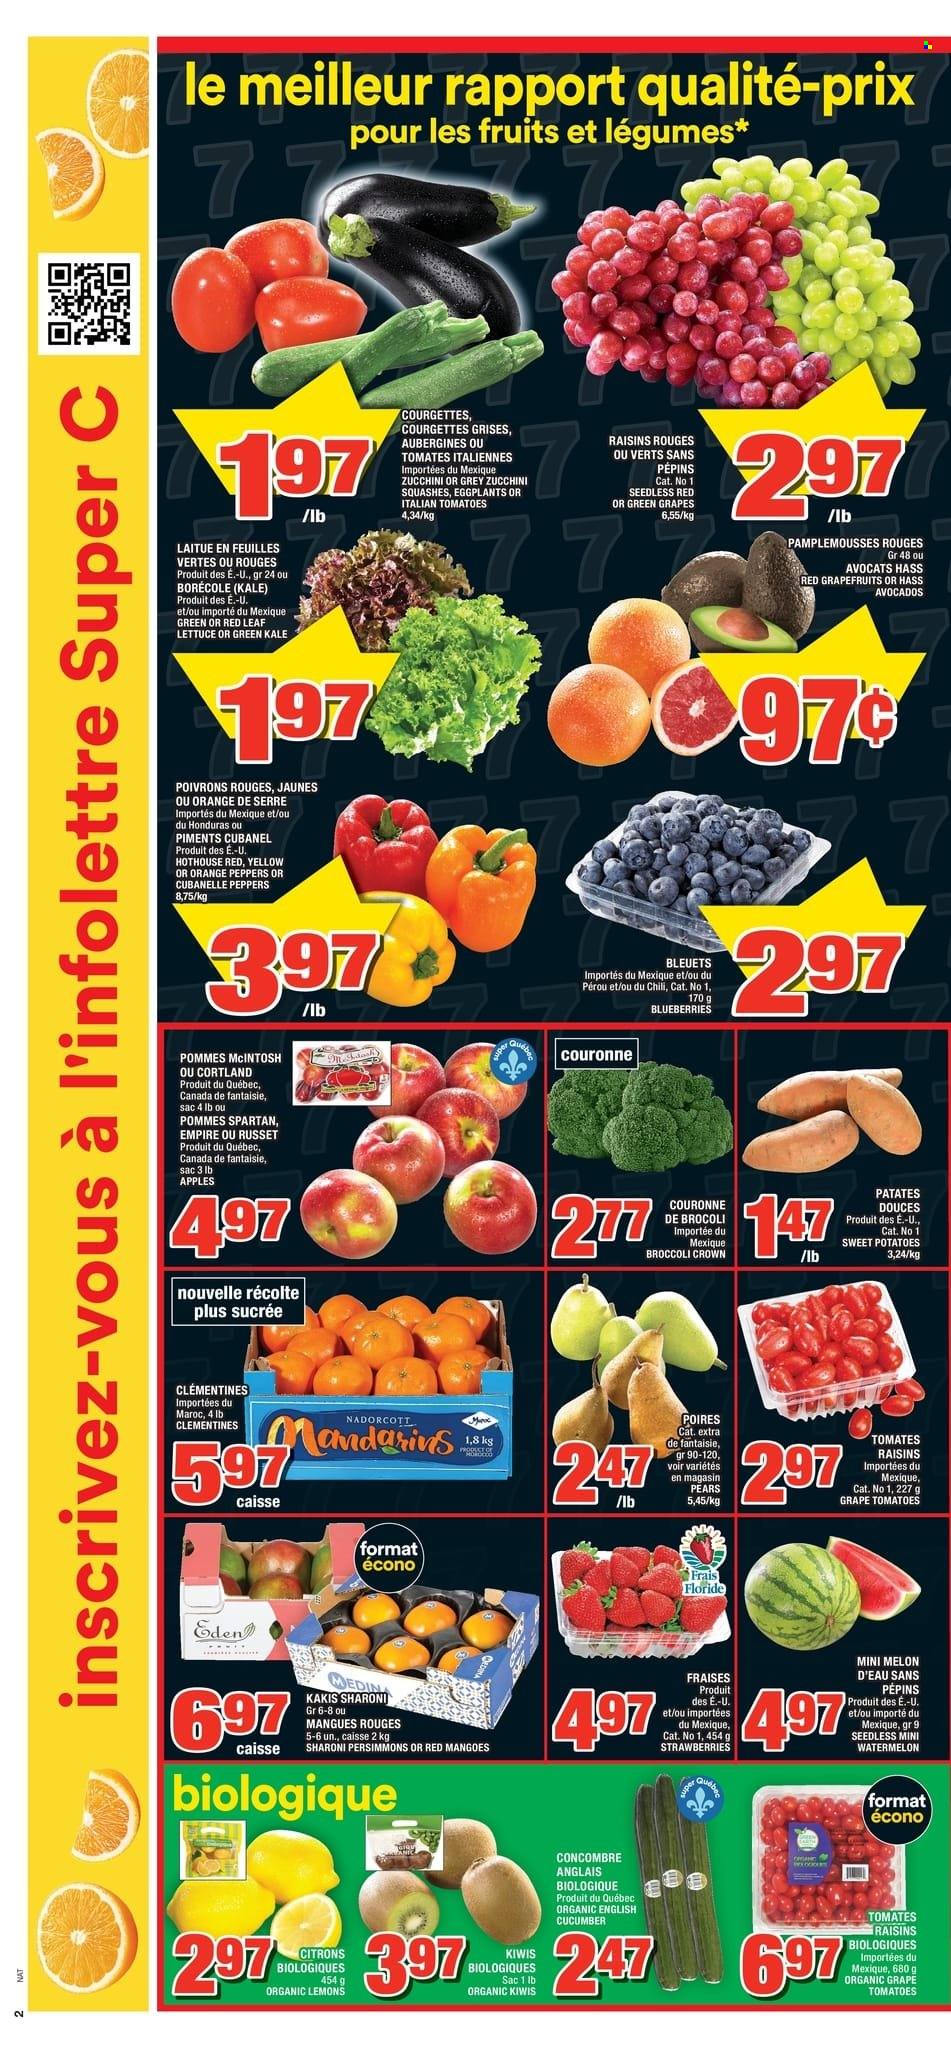 thumbnail - Super C Flyer - February 02, 2023 - February 08, 2023 - Sales products - broccoli, russet potatoes, sweet potato, tomatoes, zucchini, kale, potatoes, lettuce, peppers, eggplant, apples, avocado, clementines, grapefruits, strawberries, watermelon, pears, persimmons, oranges, melons, lemons, dried fruit, kiwi, raisins. Page 2.